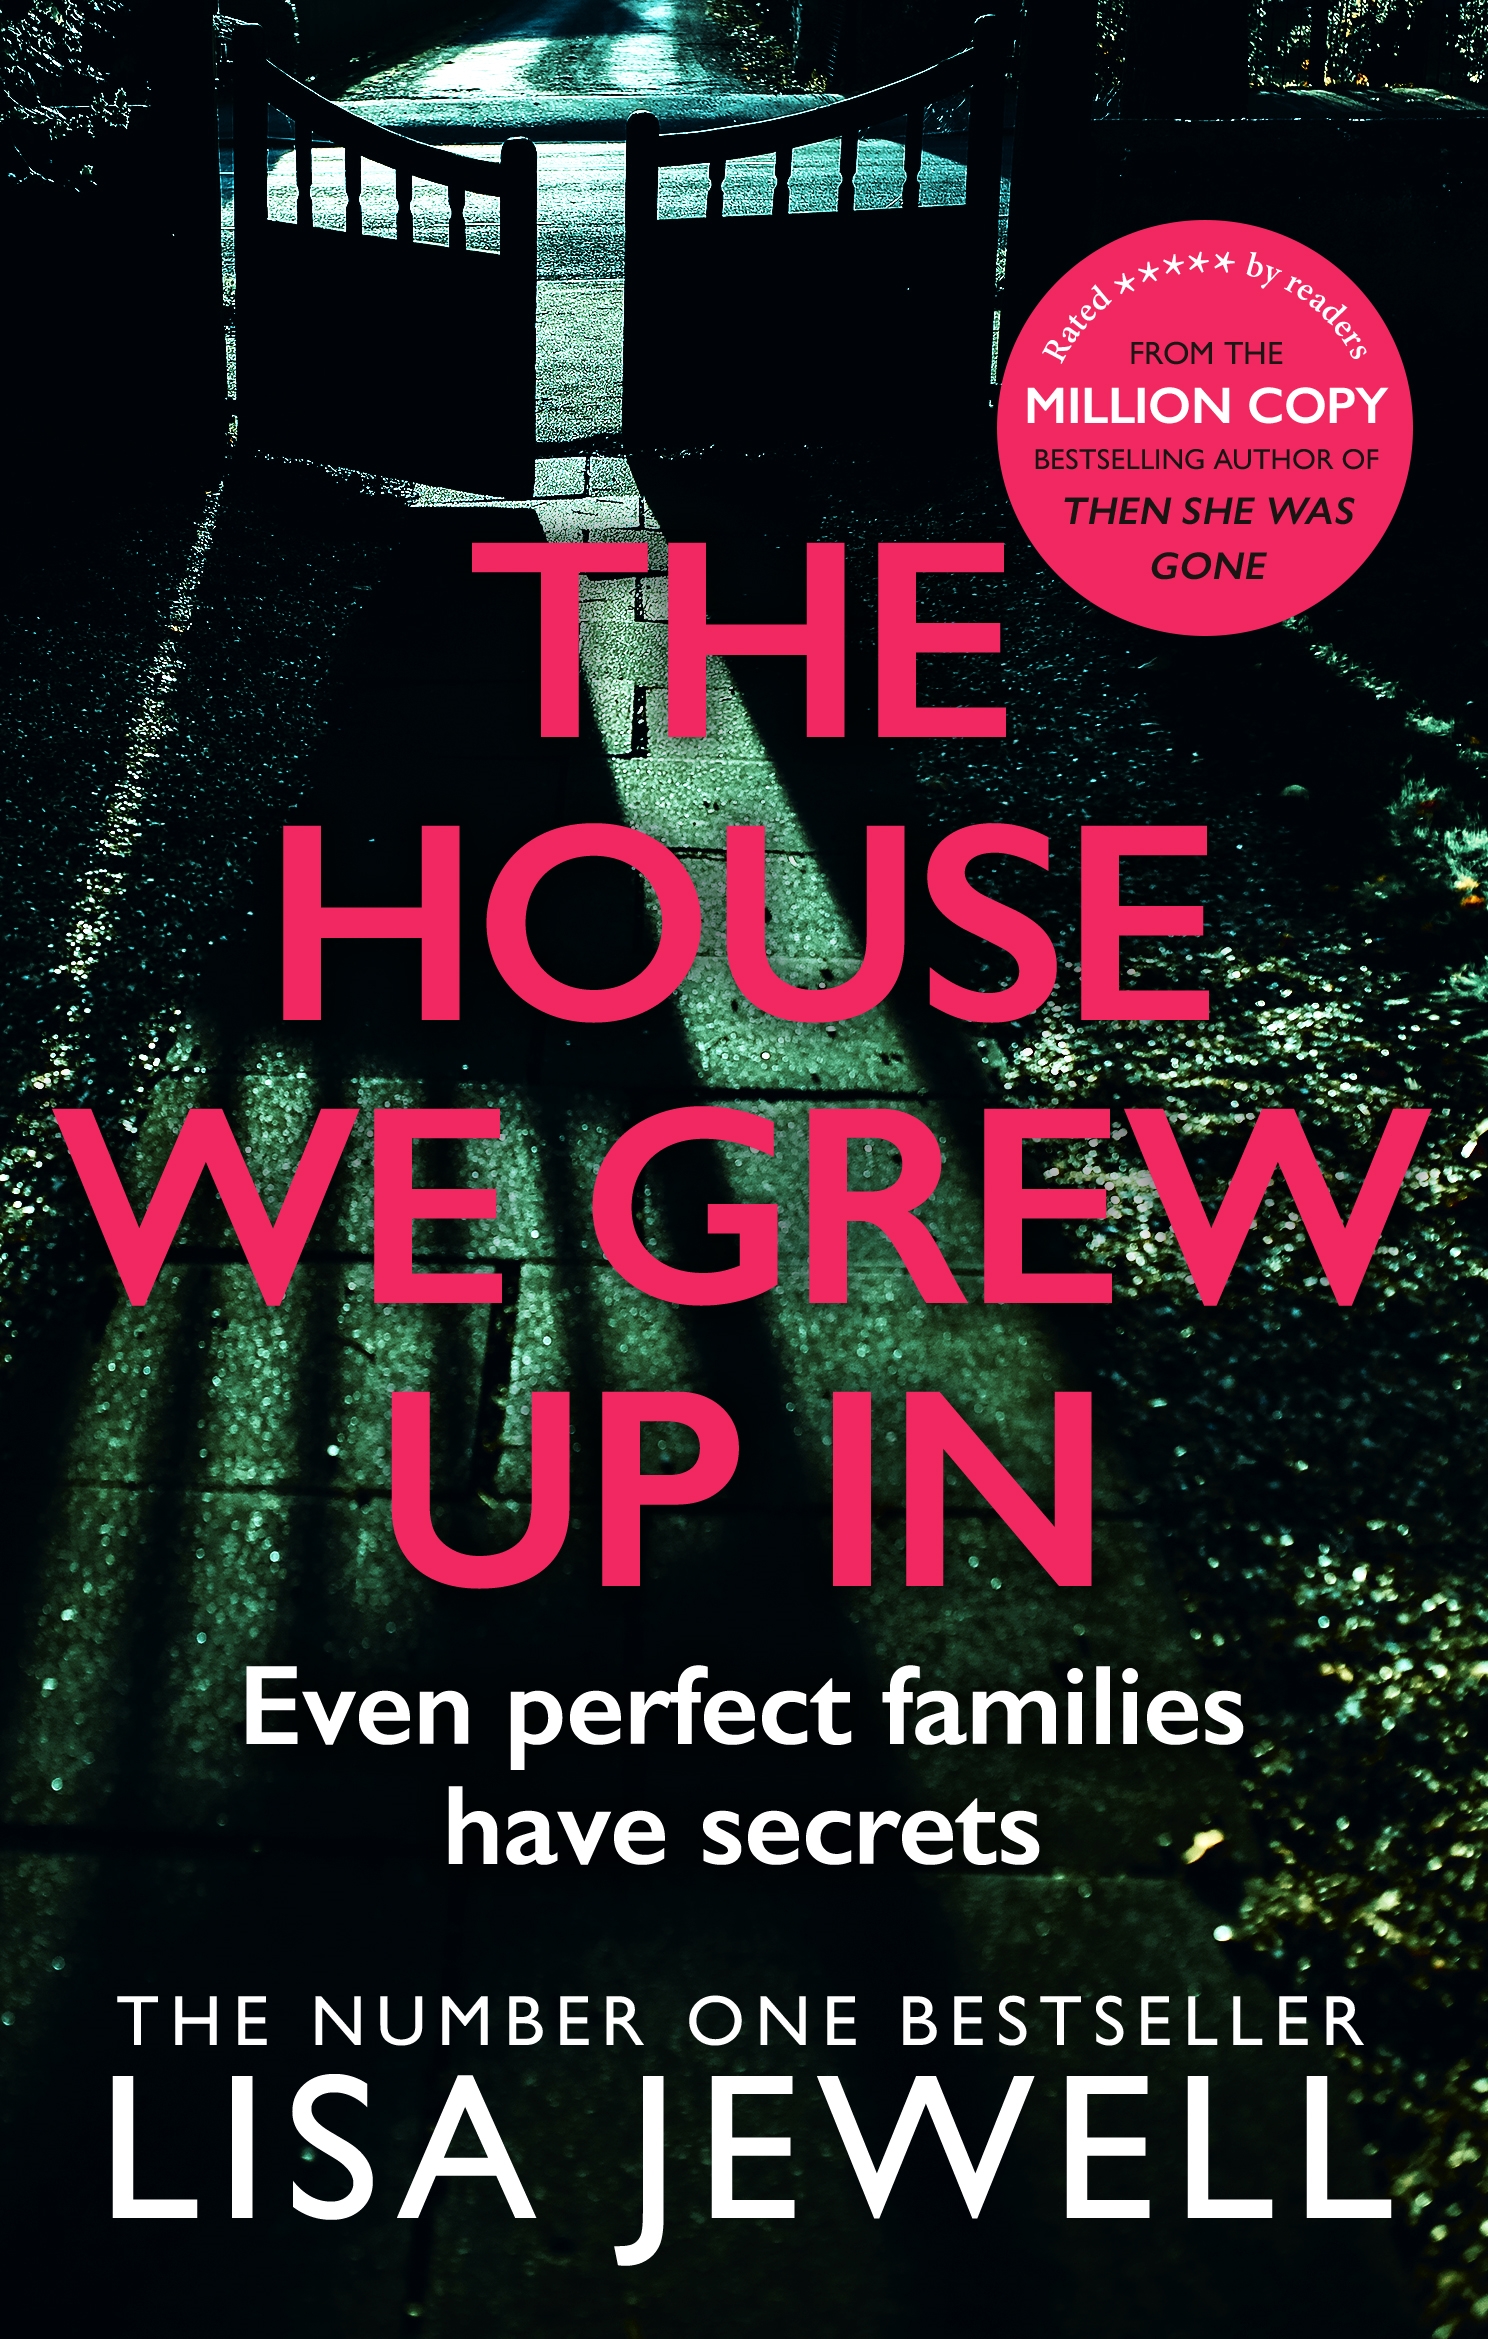 The House We Grew Up In by Lisa Jewell